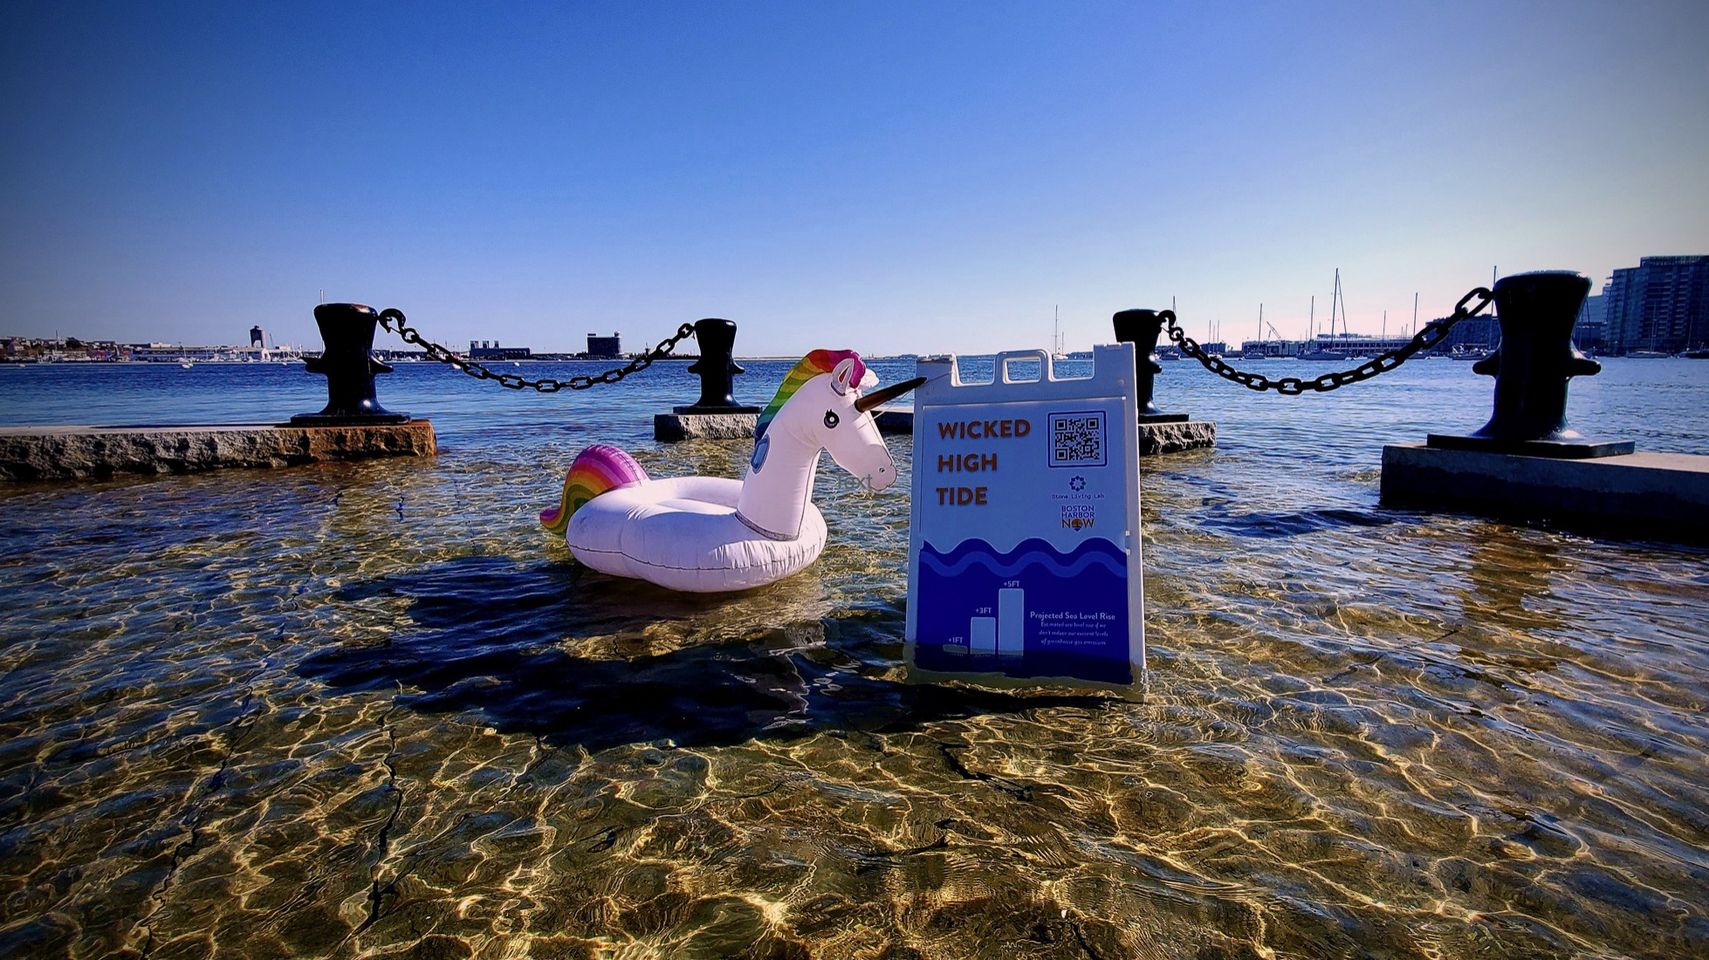 A blow-up unicorn float rests next to a "high tide" sign in sparkling clear, shallow waters. Boats and the city skyline can be seen distinctly in the backdrop.